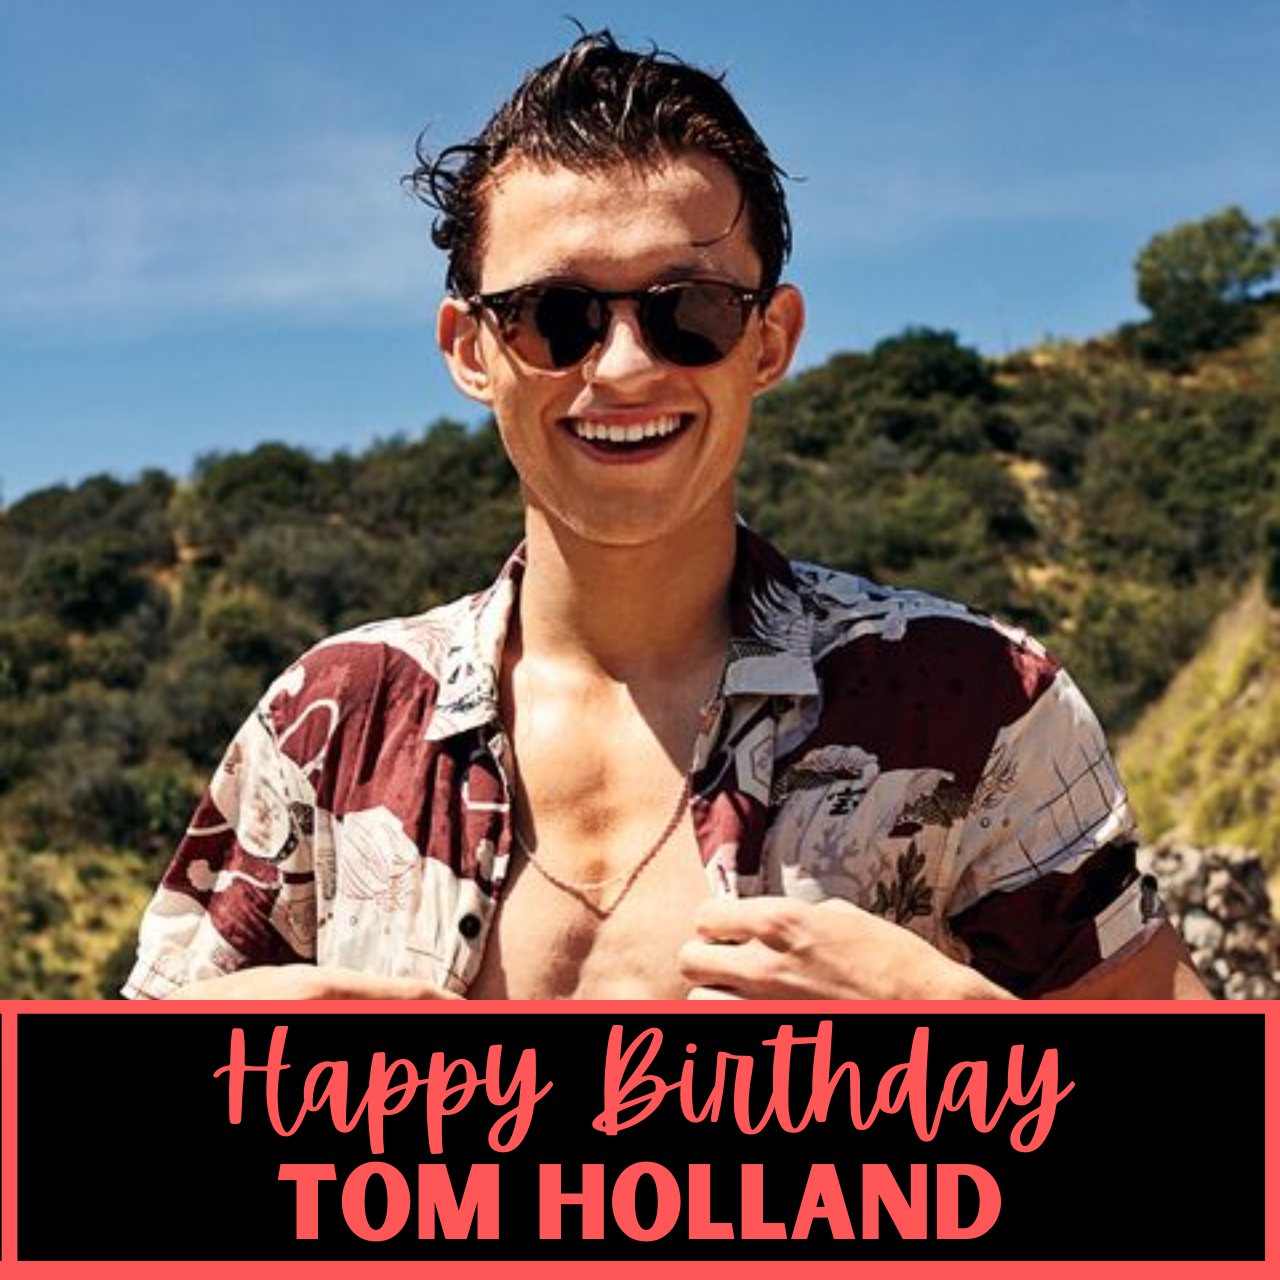 Happy Birthday Tom Holland: Wishes, Quotes, Images, Posters, and Messages, to greet "Spider-Man"